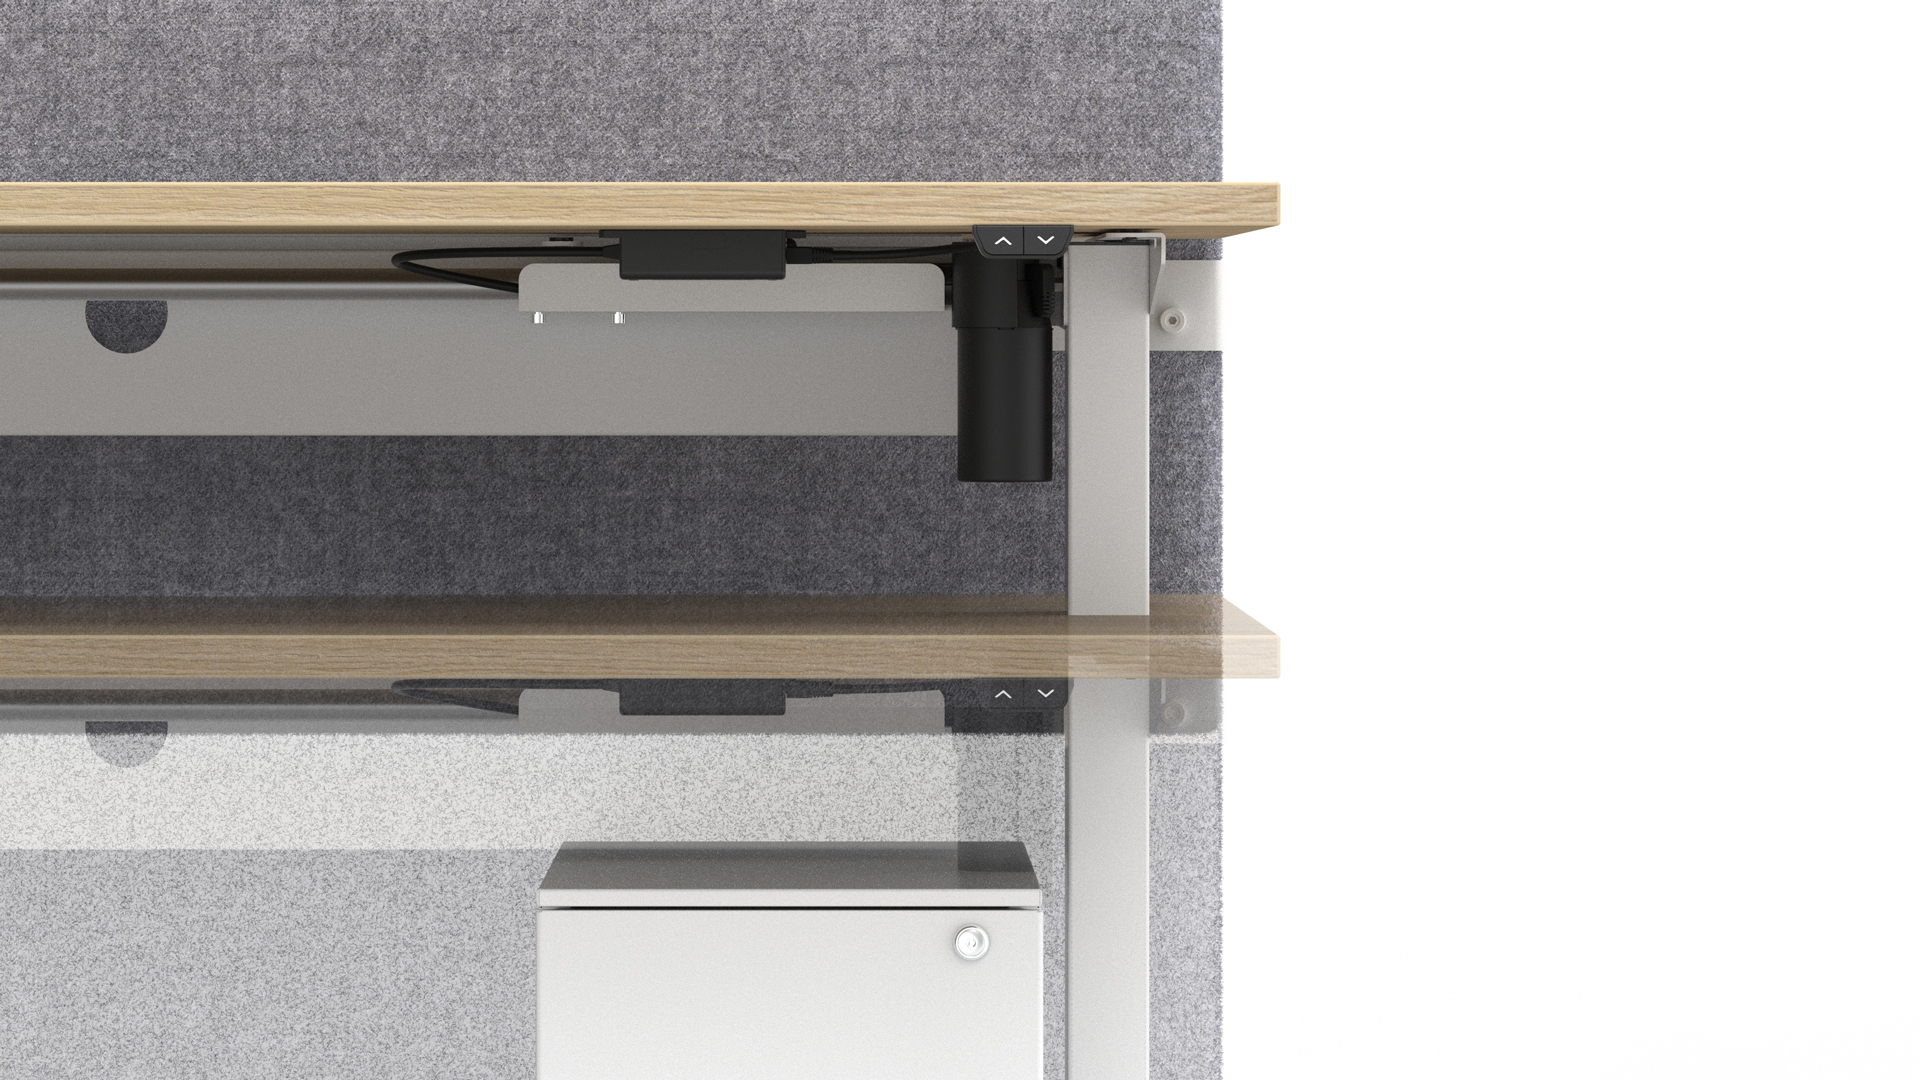 The anti-collision safety system detects obstacles beneath the desk during height adjustment